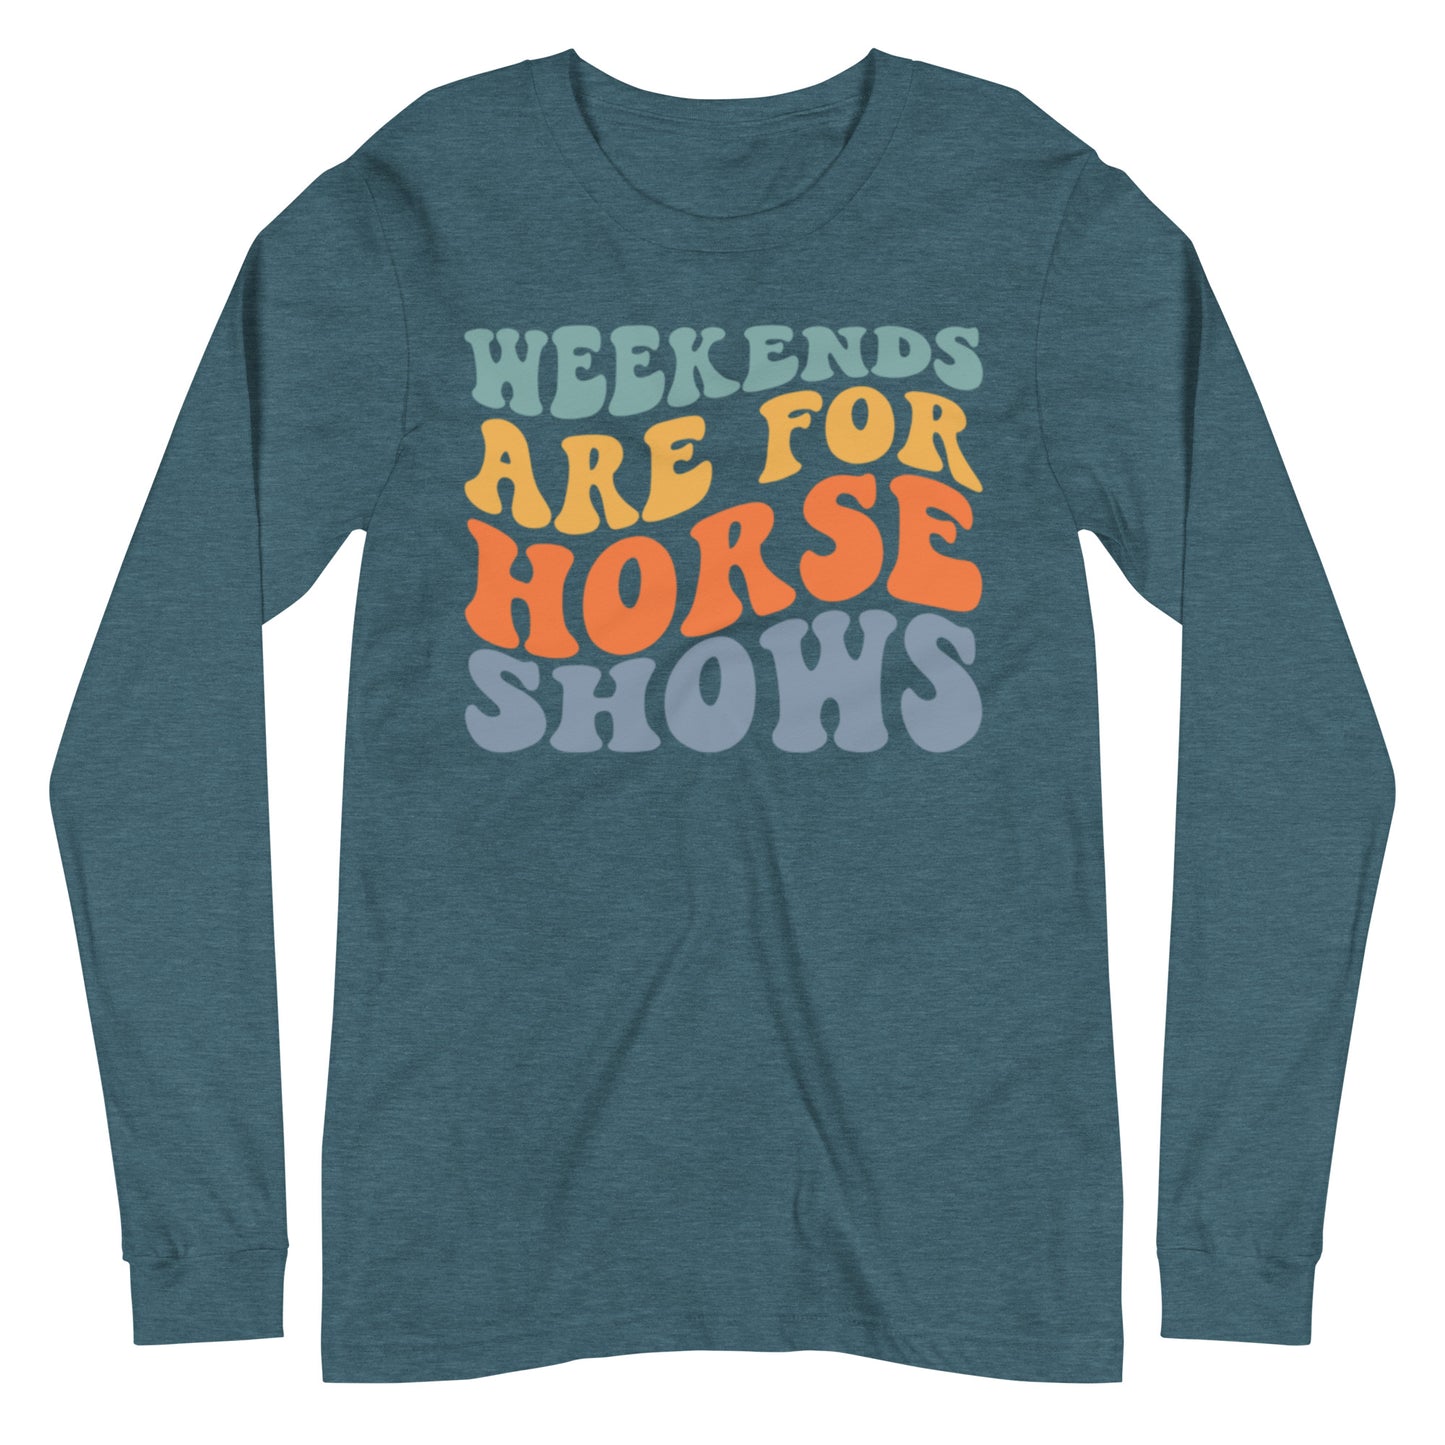 Unisex Long Sleeve Tee “Weekends Are For Horseshows”